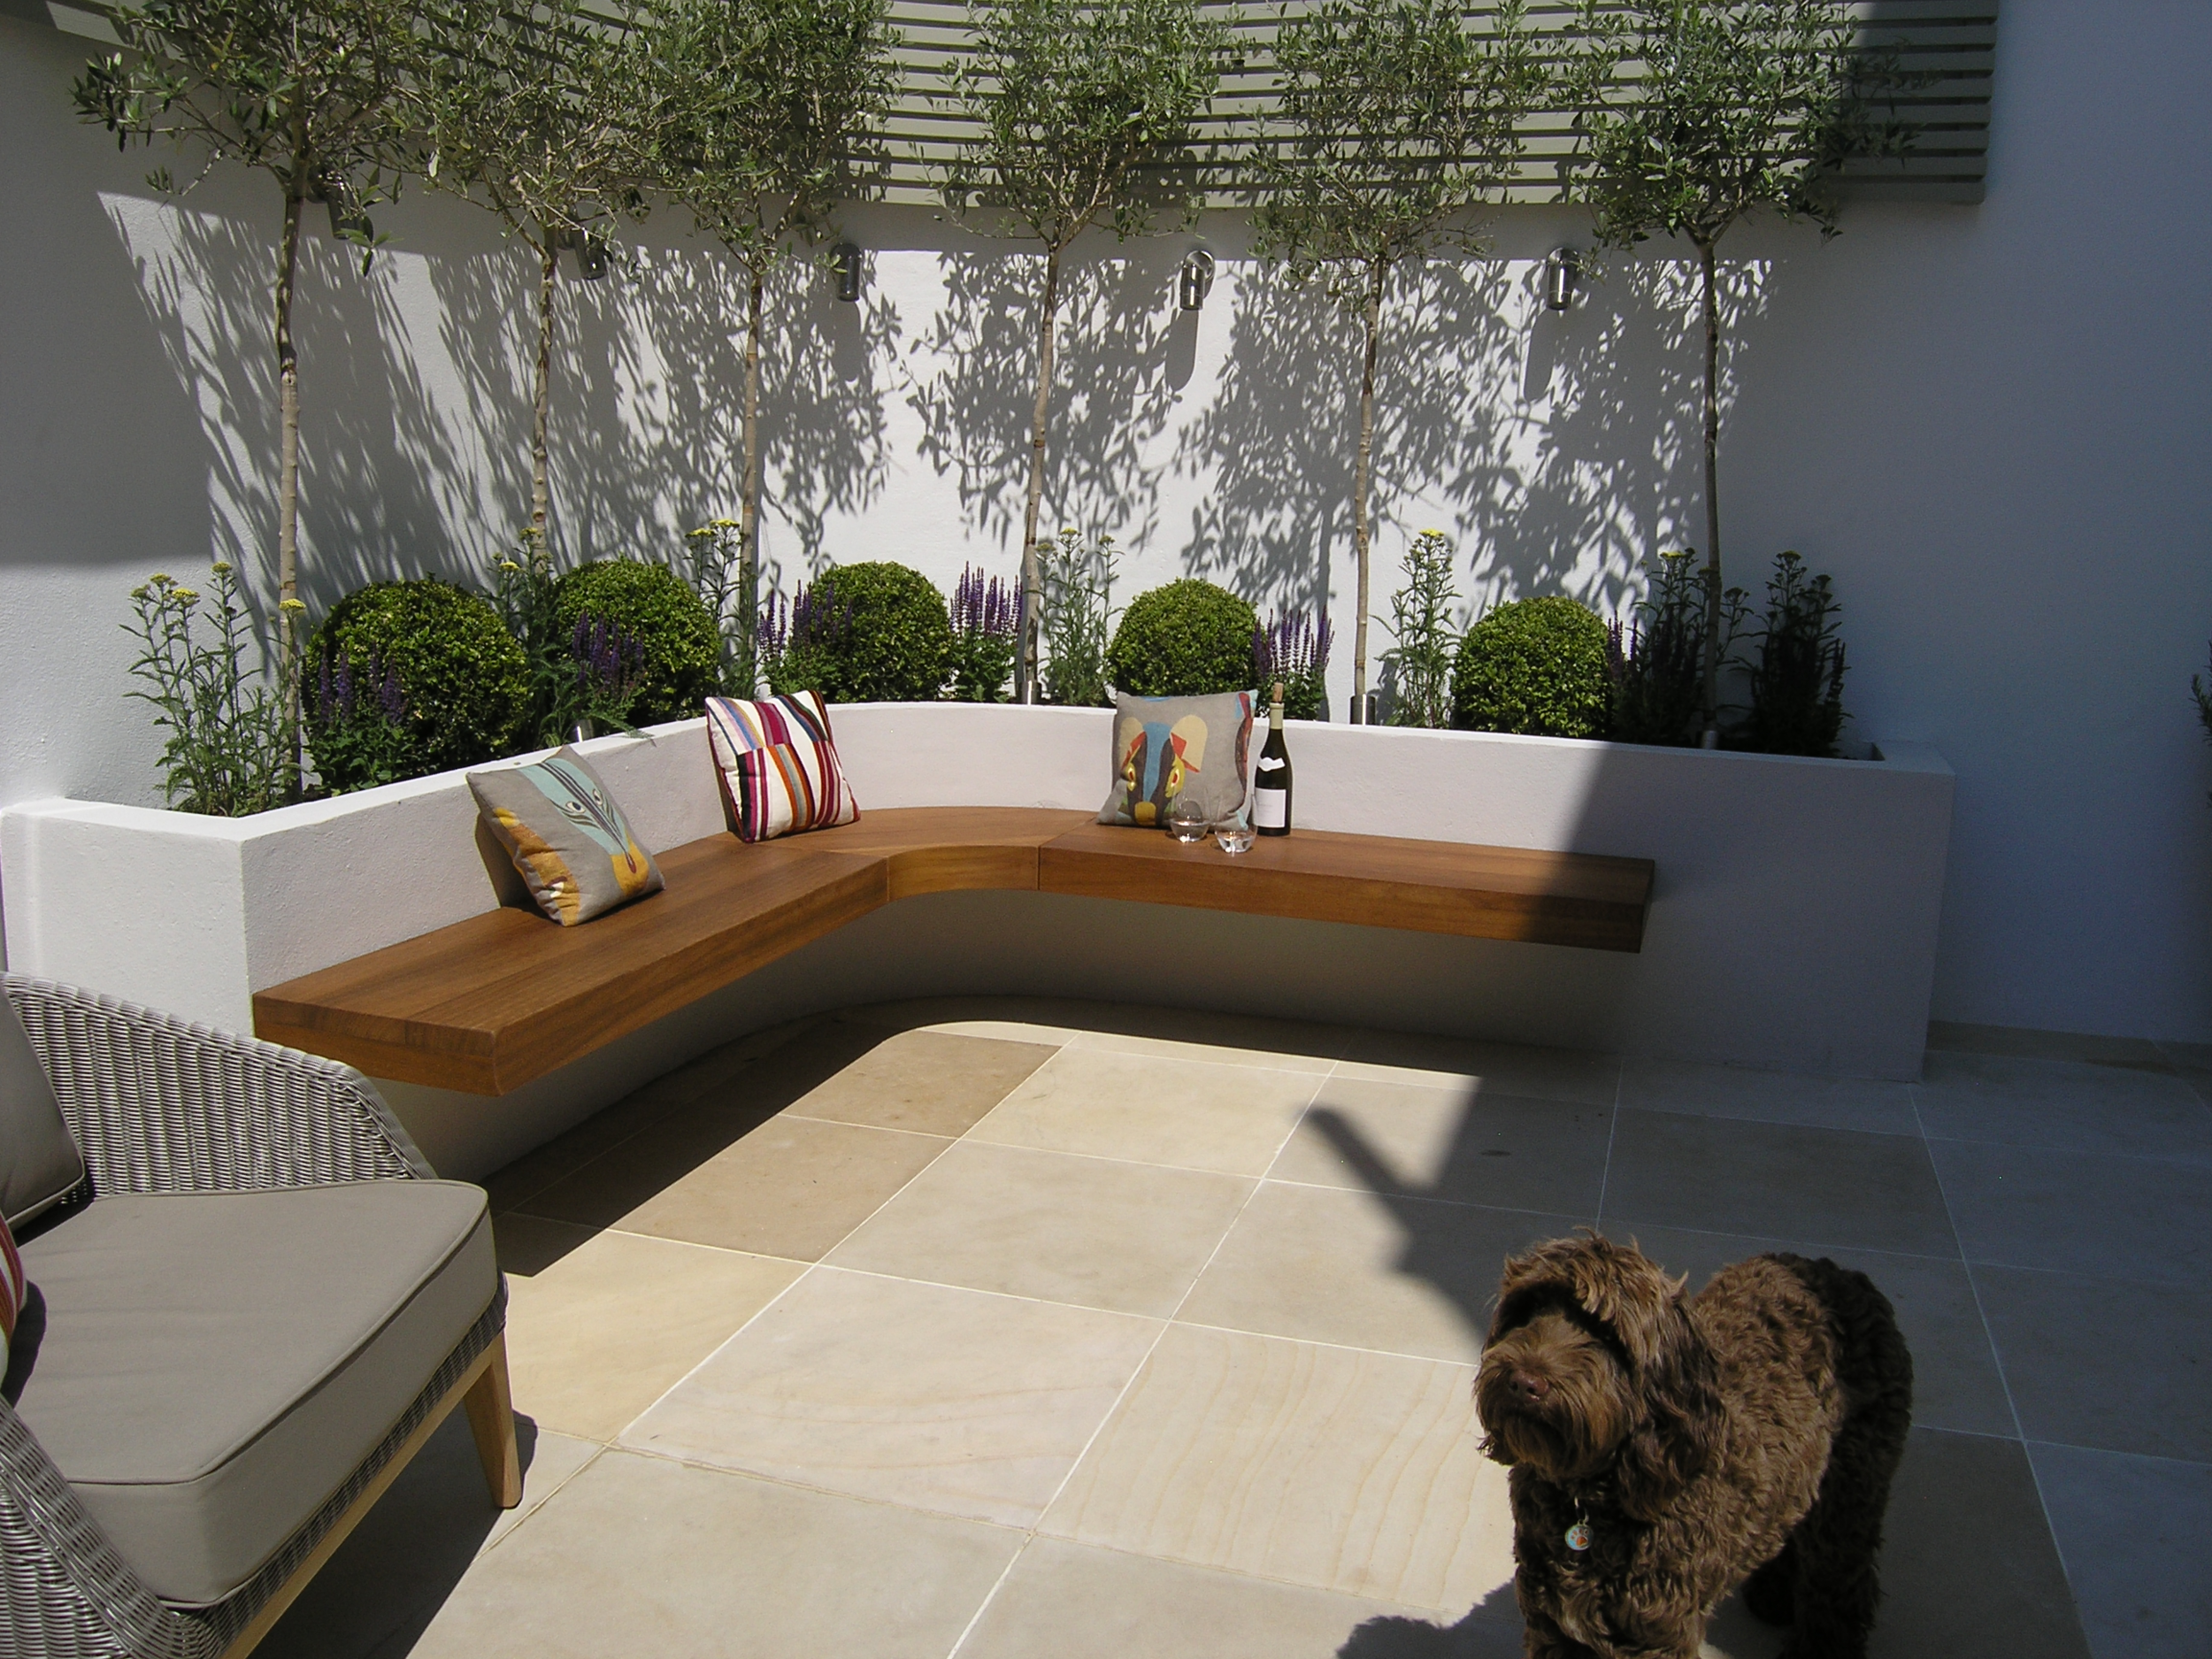  Courtyard garden ideas in London N8 with patio, benches and low maintenance planting. 